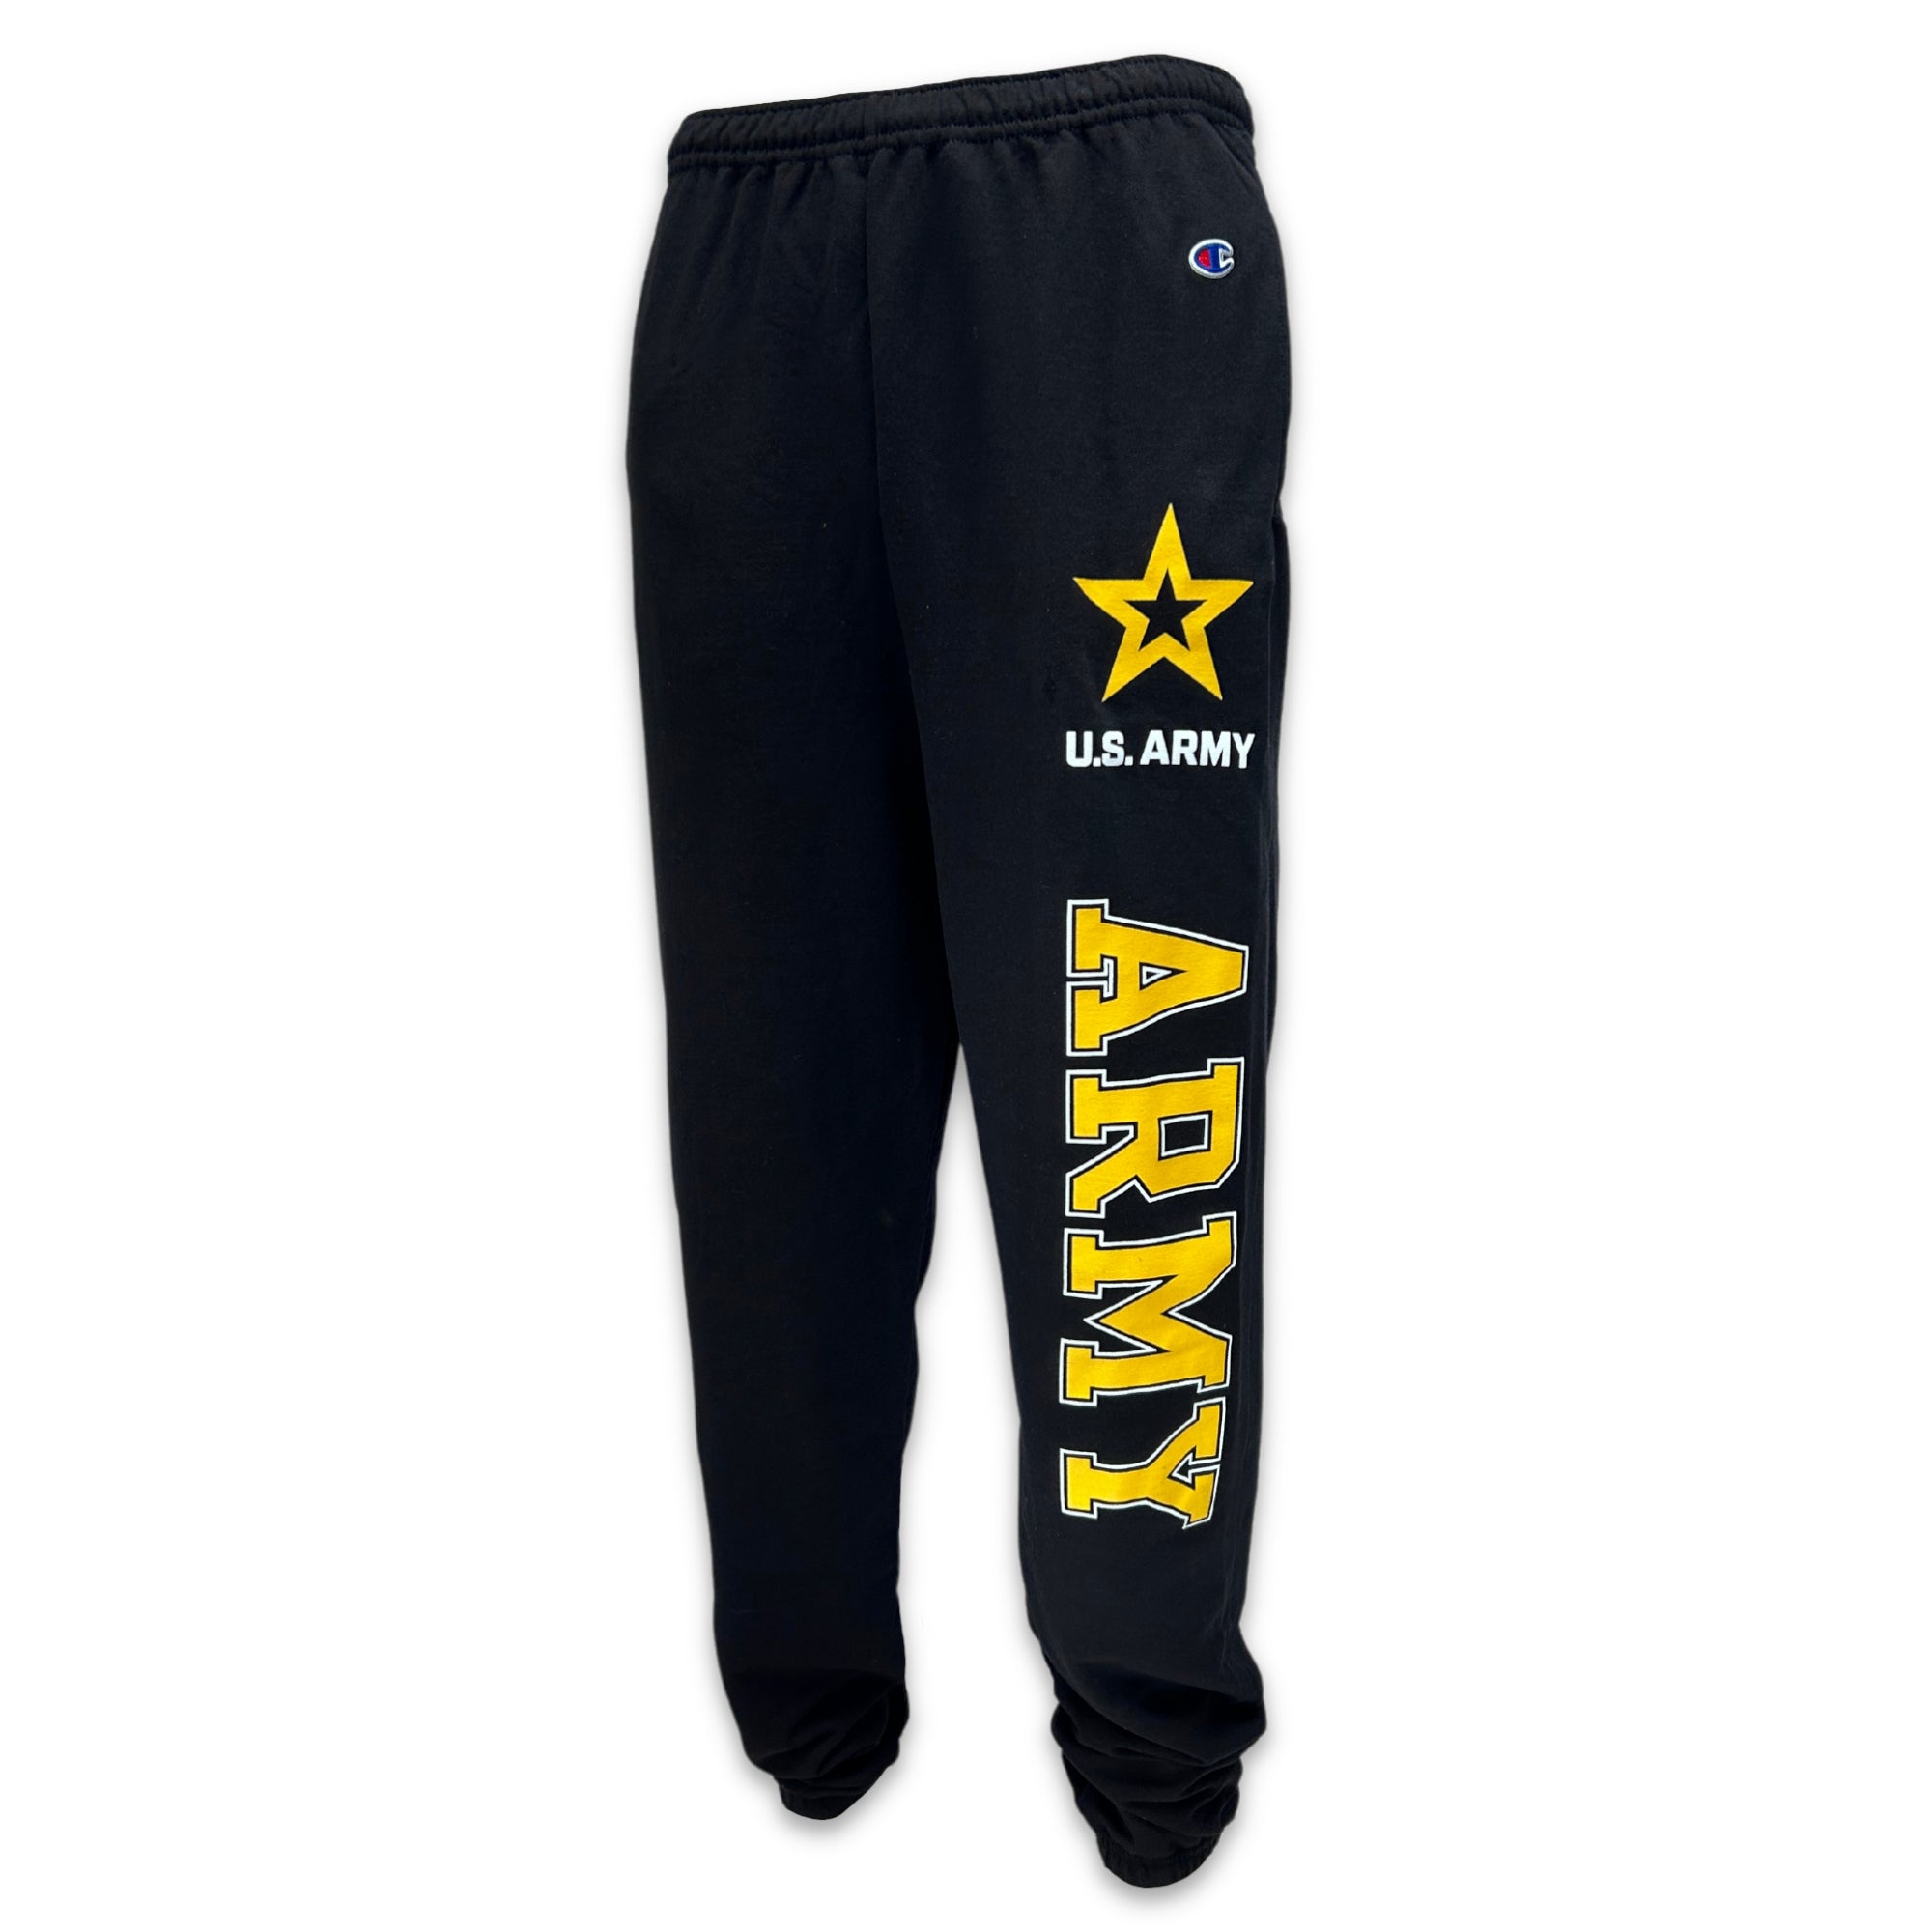 Under Armour Sweatpants for sale in Mobile, Alabama